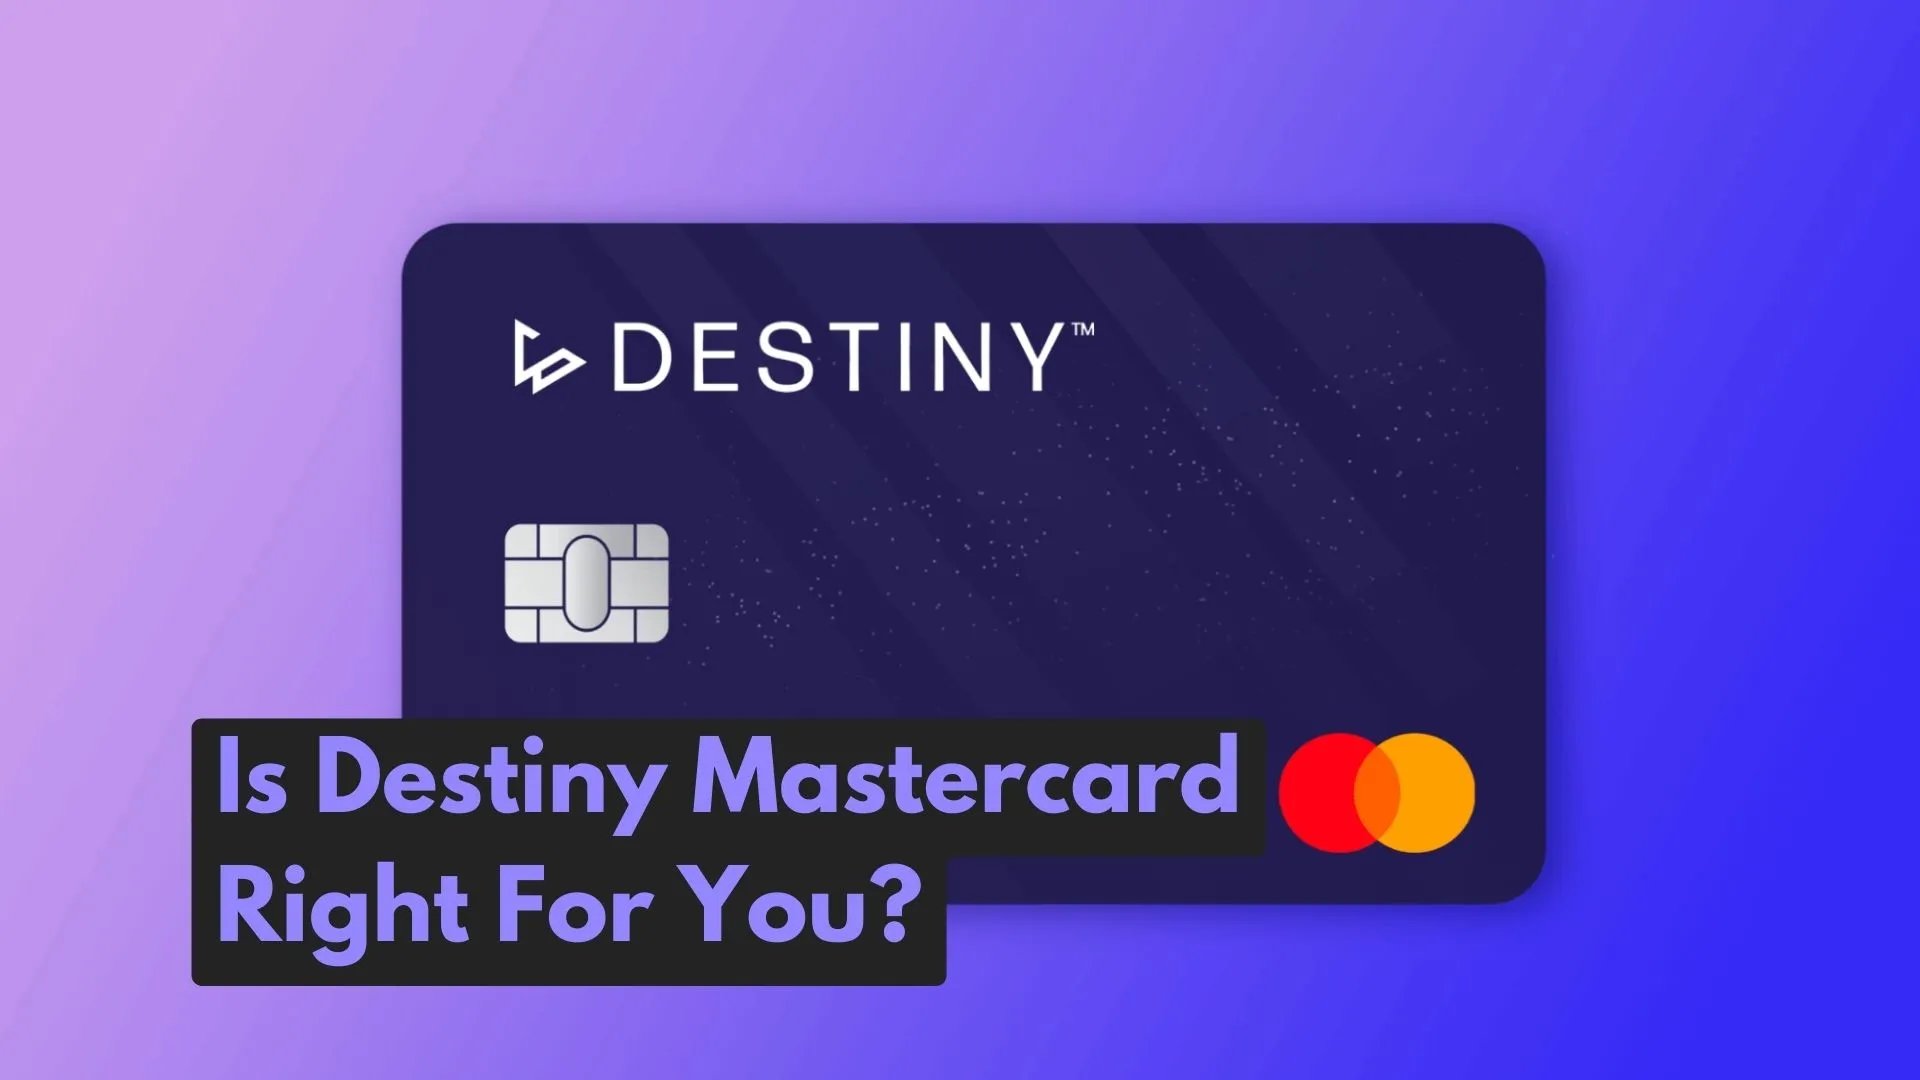 Review Destiny Mastercard Before You Apply by banks-detail.com